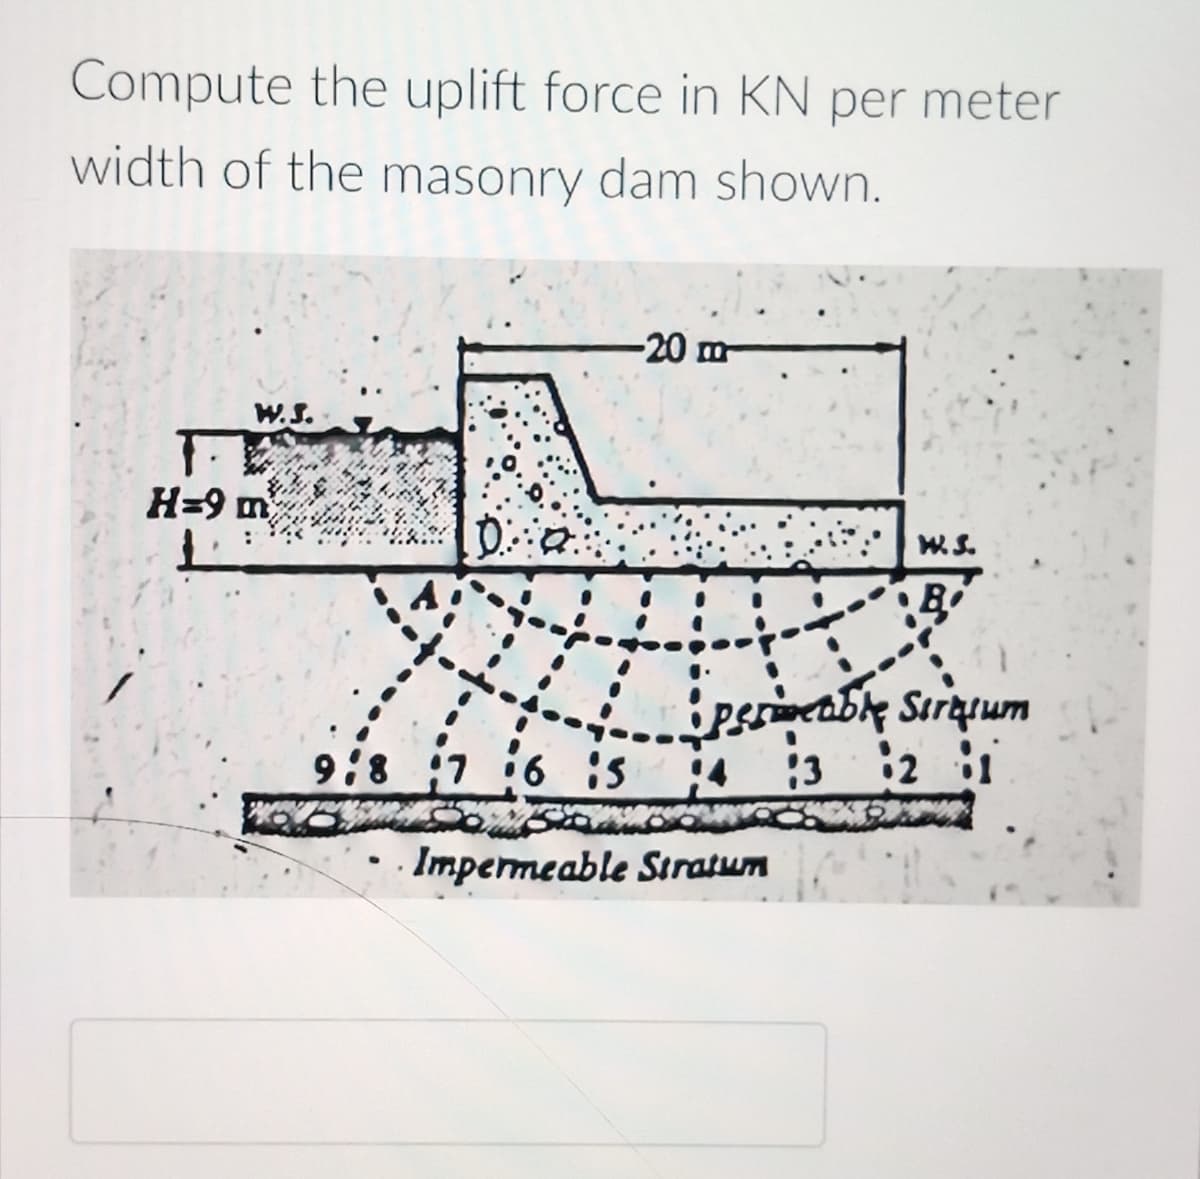 Compute the uplift force in KN per meter
width of the masonry dam shown.
-20 m
W.S.
.D.:
W. S.
B
AR
pesimetable Sirqium
4 3 2 1
H=9 m
6:5
Impermeable Stratum
9:8 17